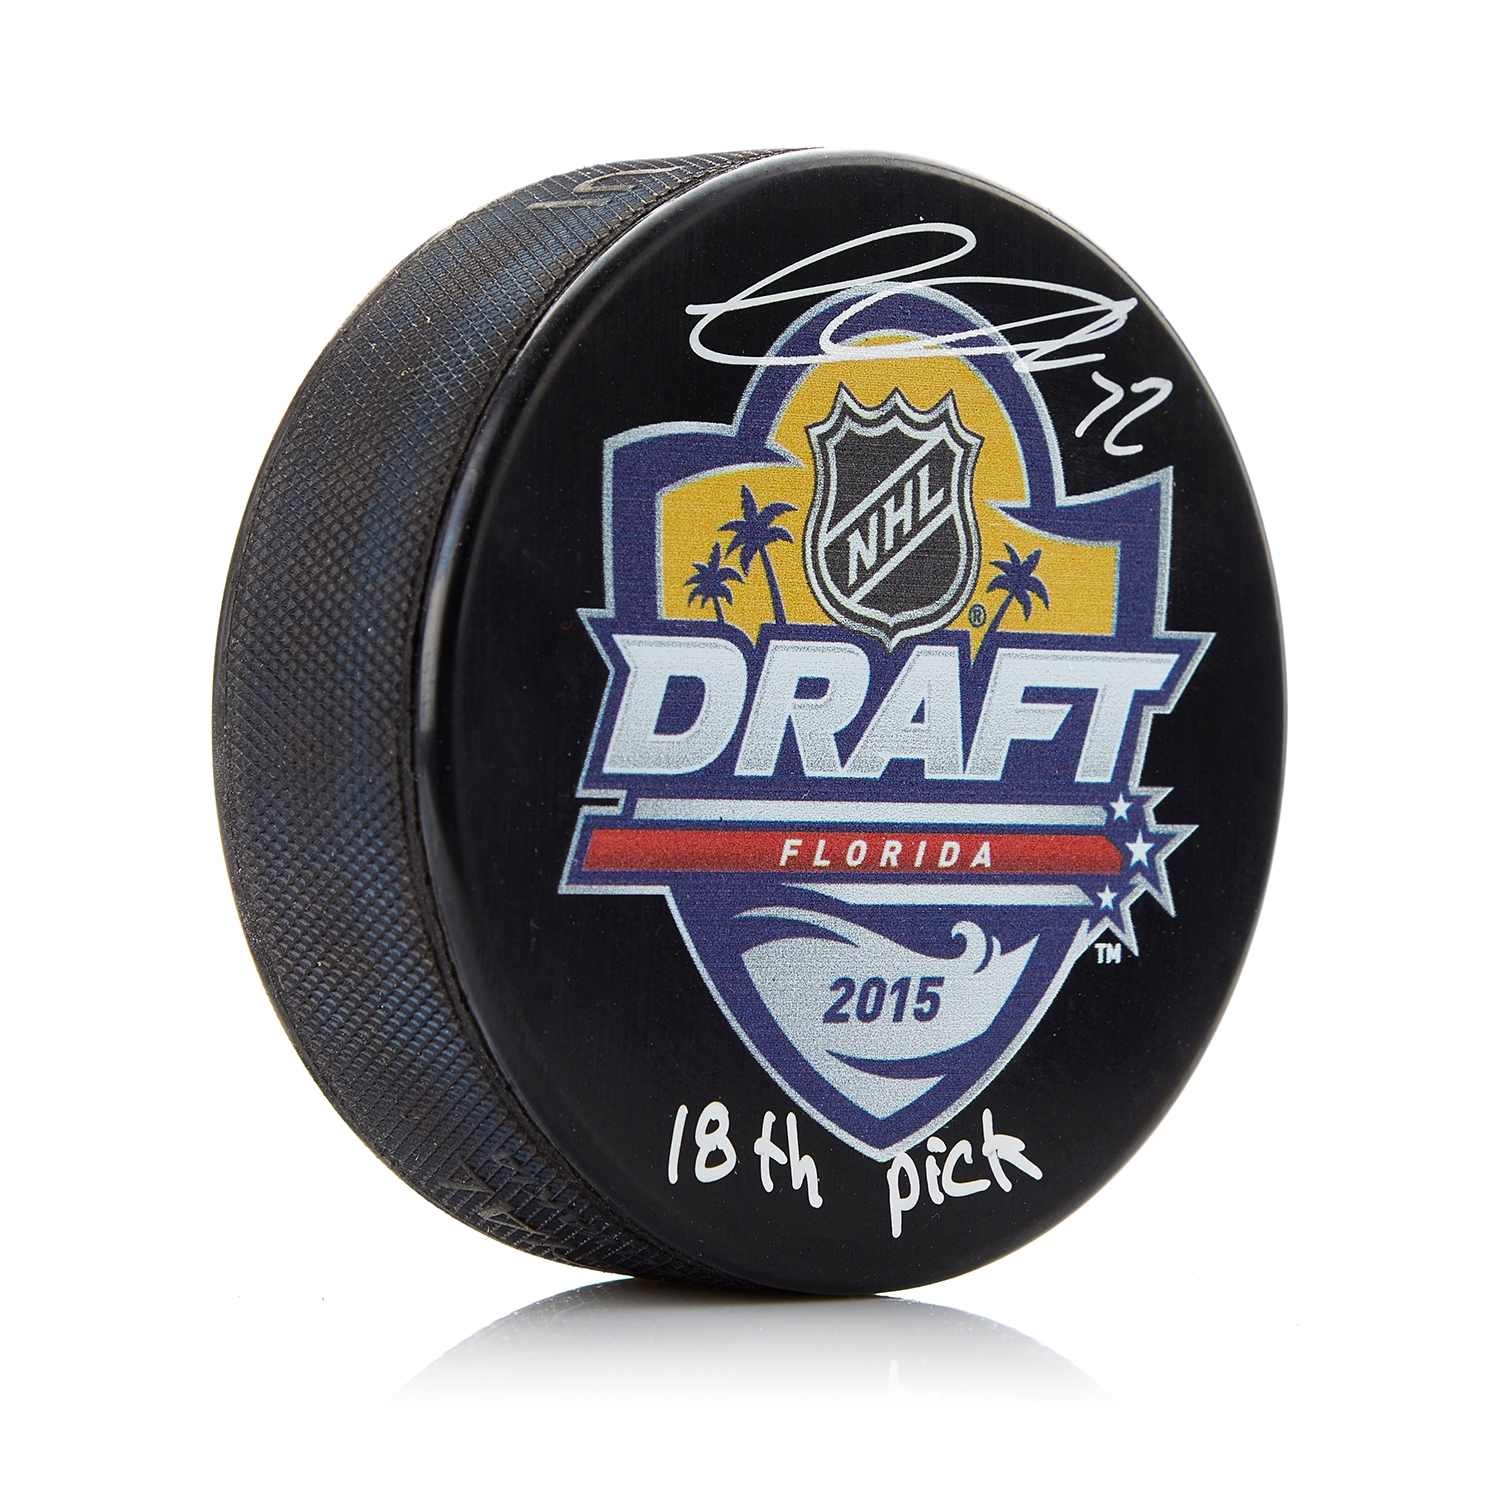 Thomas Chabot Signed 2015 NHL Entry Draft Puck with 18th Pick